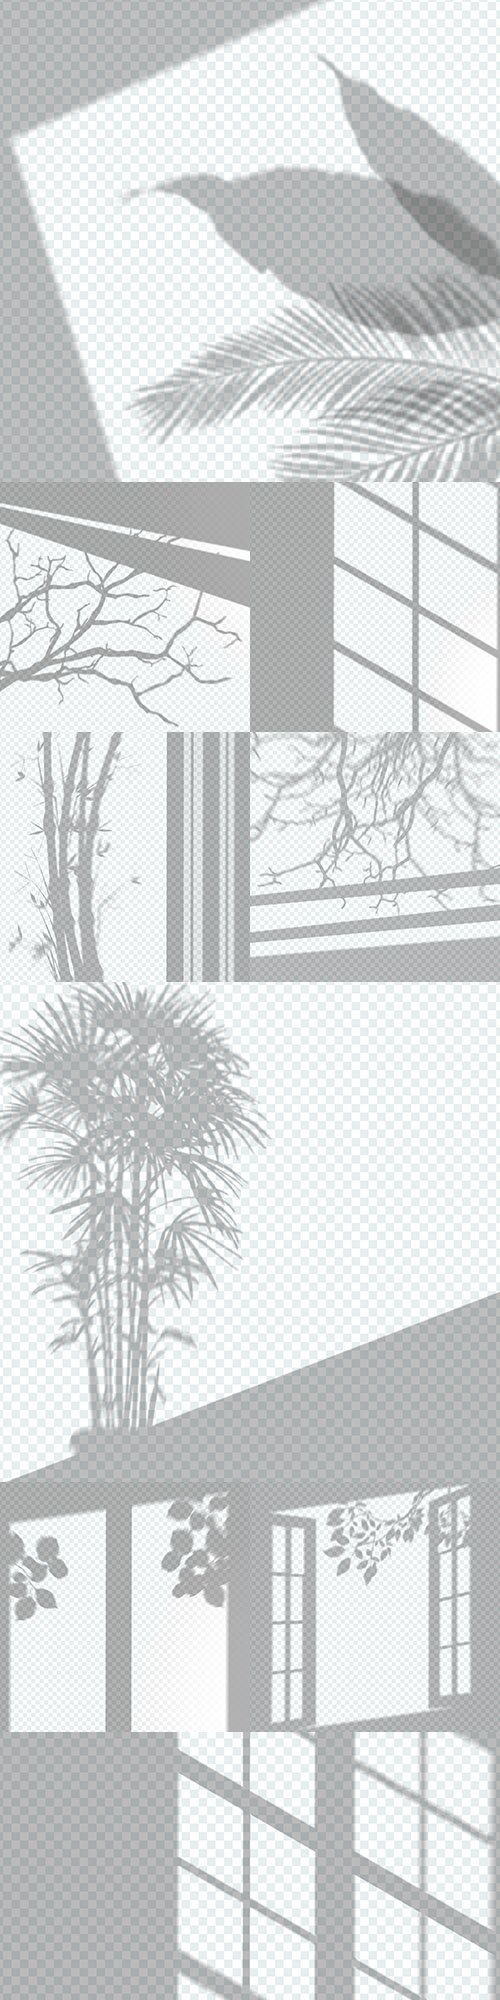 Effect applying transparent window shadows and trees